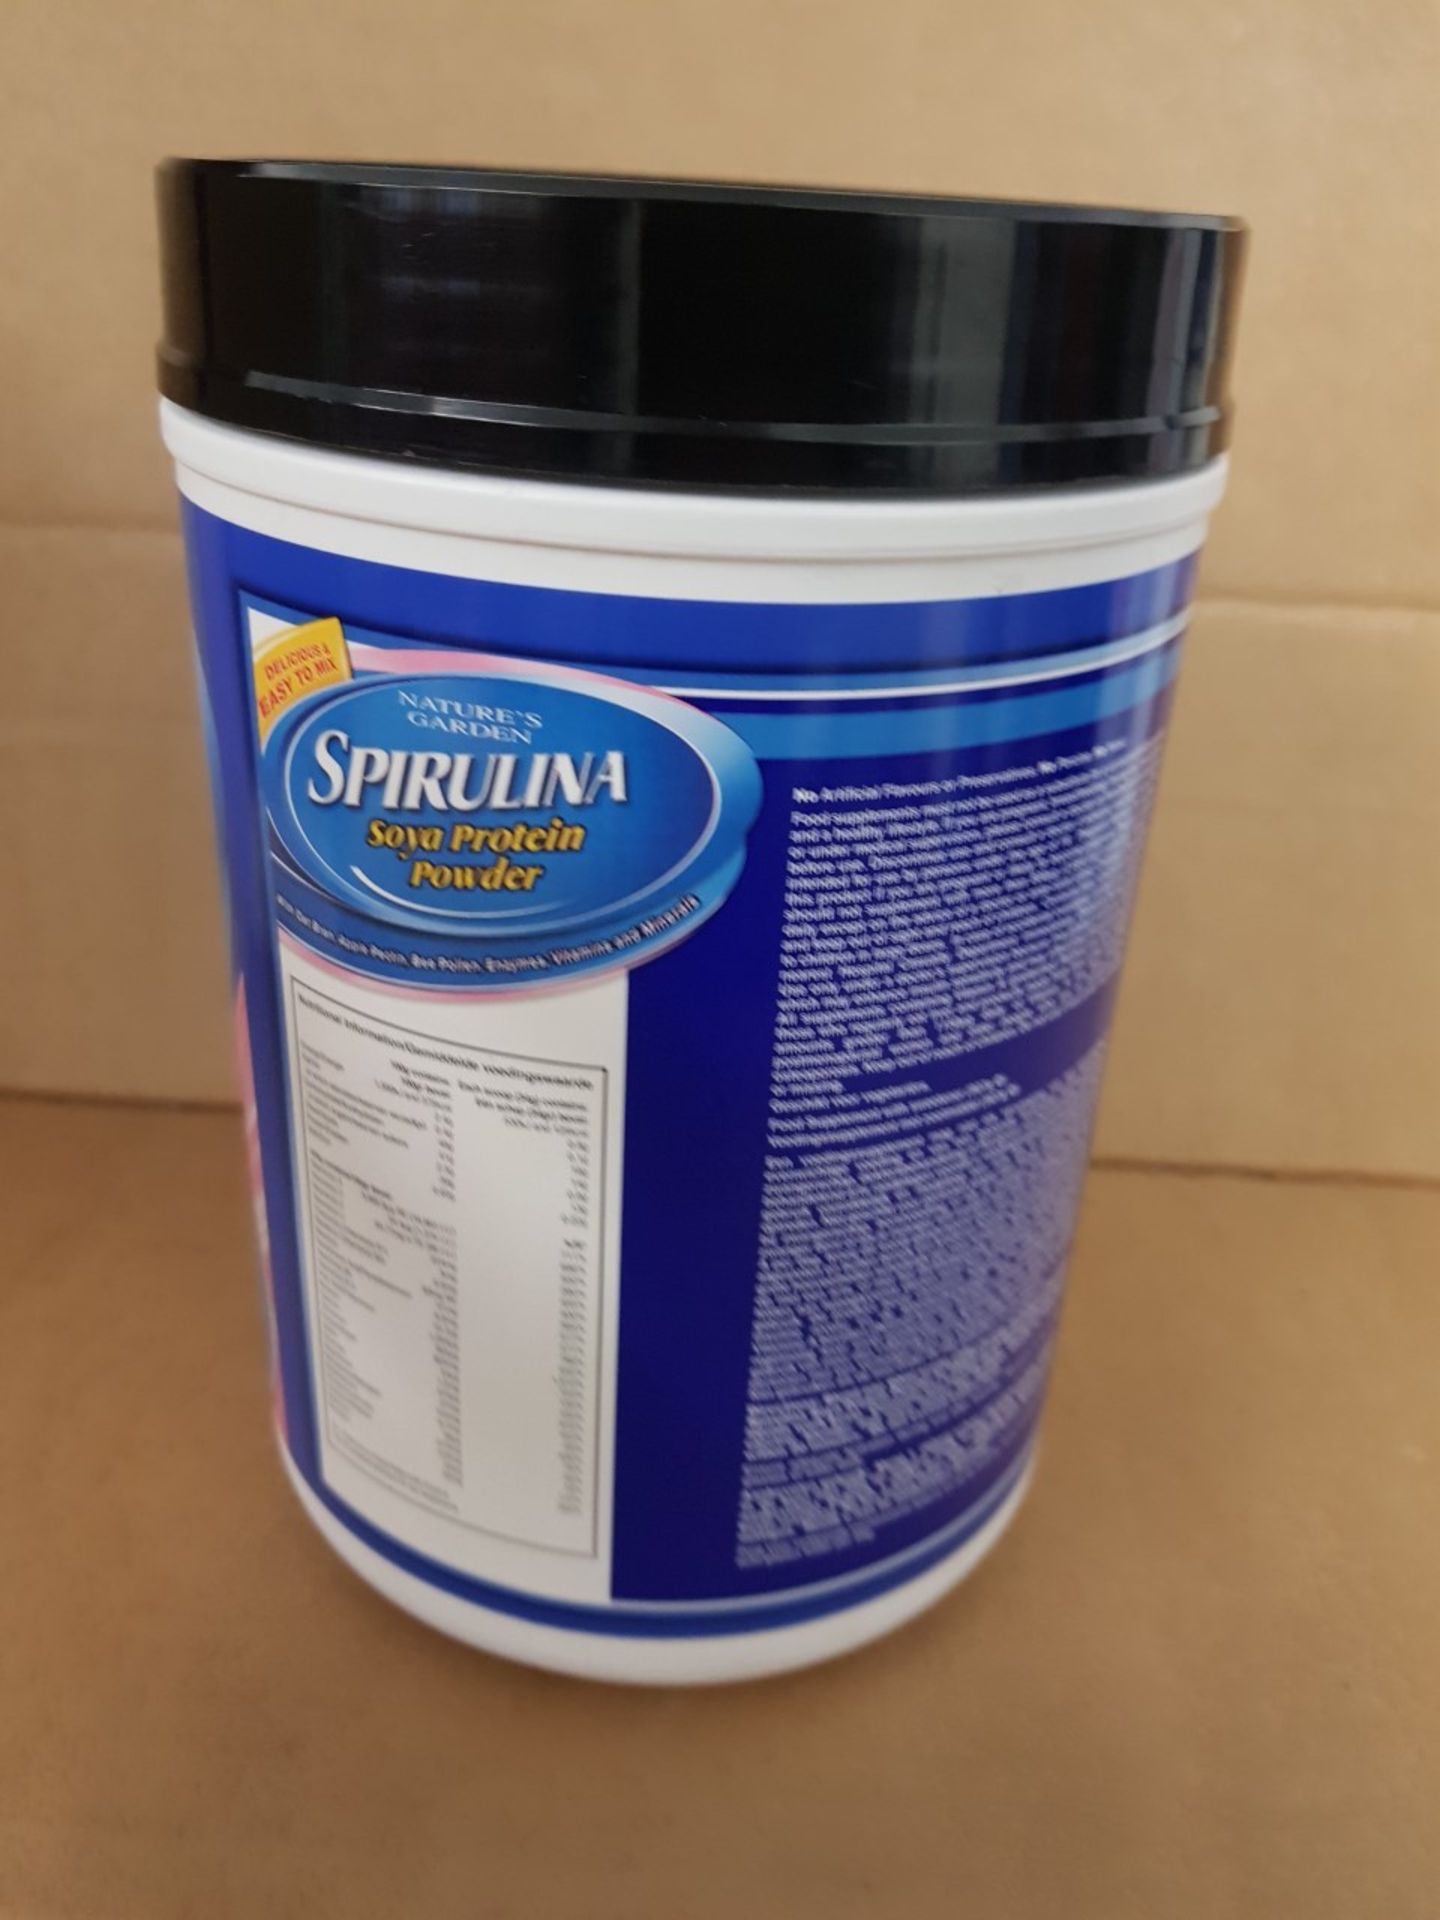 8 x NEW & SEALED 907G Tubs of Nature's Garden Spirulina - Soya Protein Powder. Makes delicious - Image 7 of 10